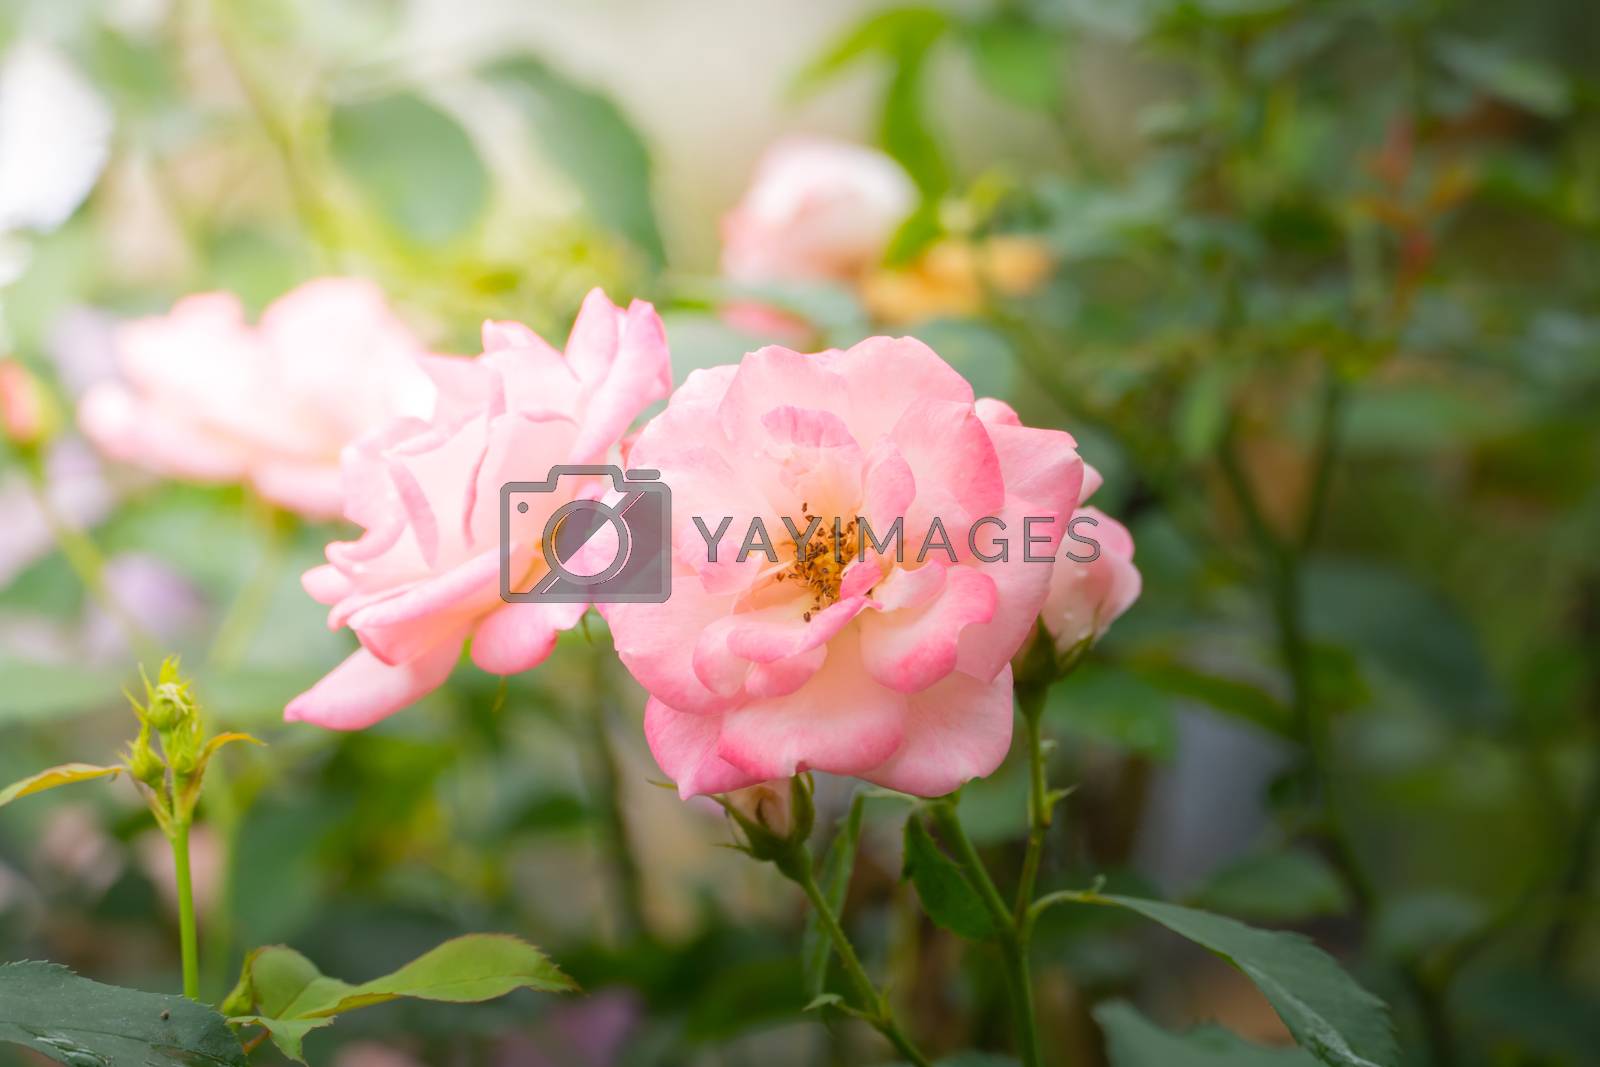 Royalty free image of Roses in the garden  by teerawit